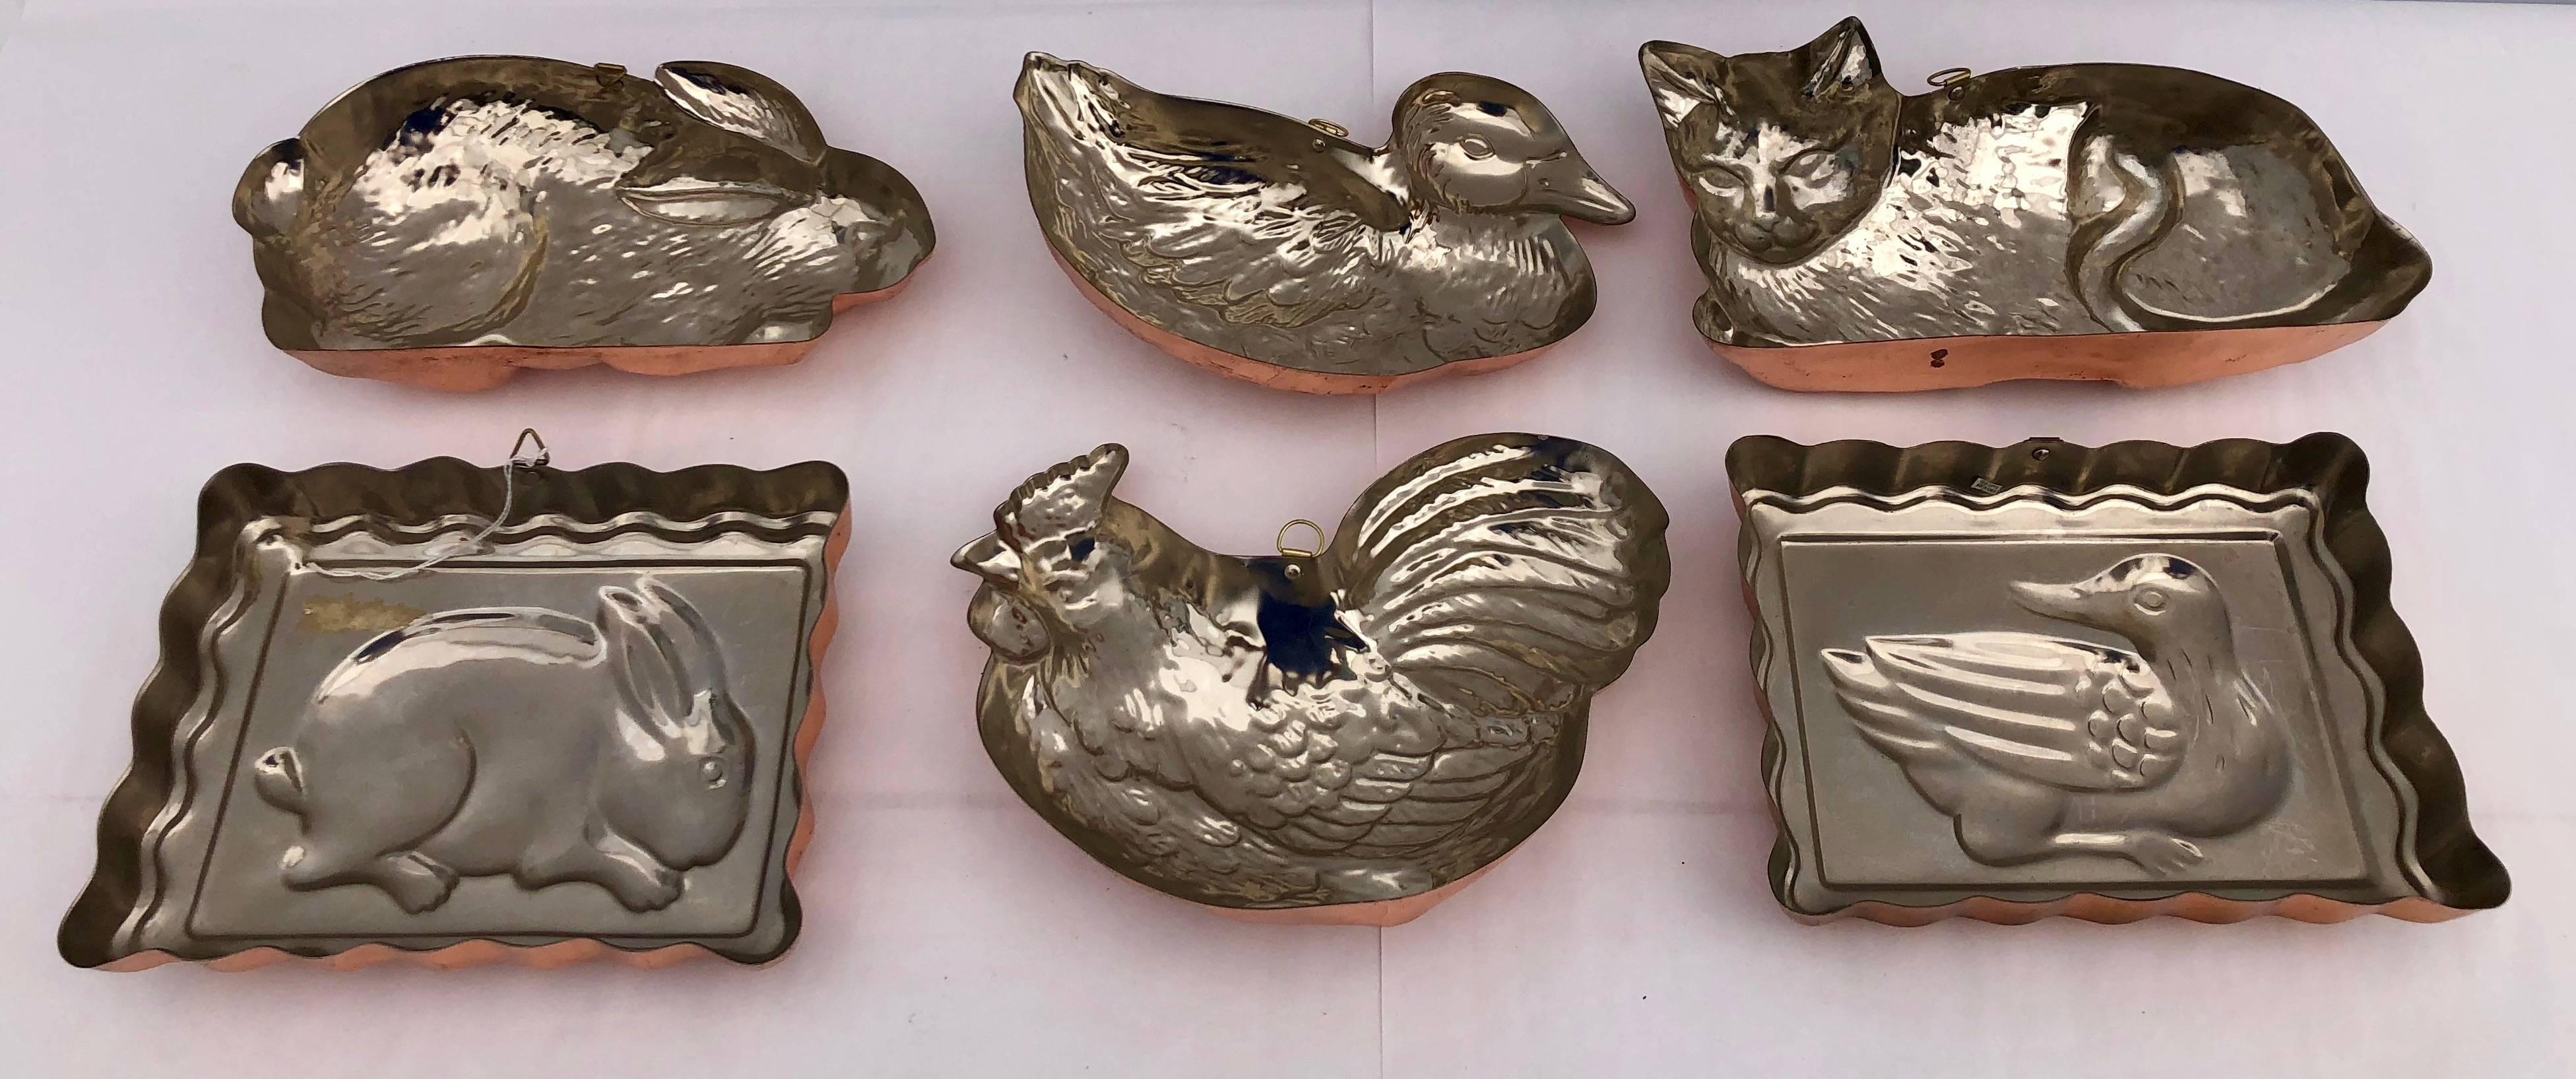 Embossed Set of Six Tin Molds with Copper in the Shape of Rabbits, Cat, Ducks and Chicken